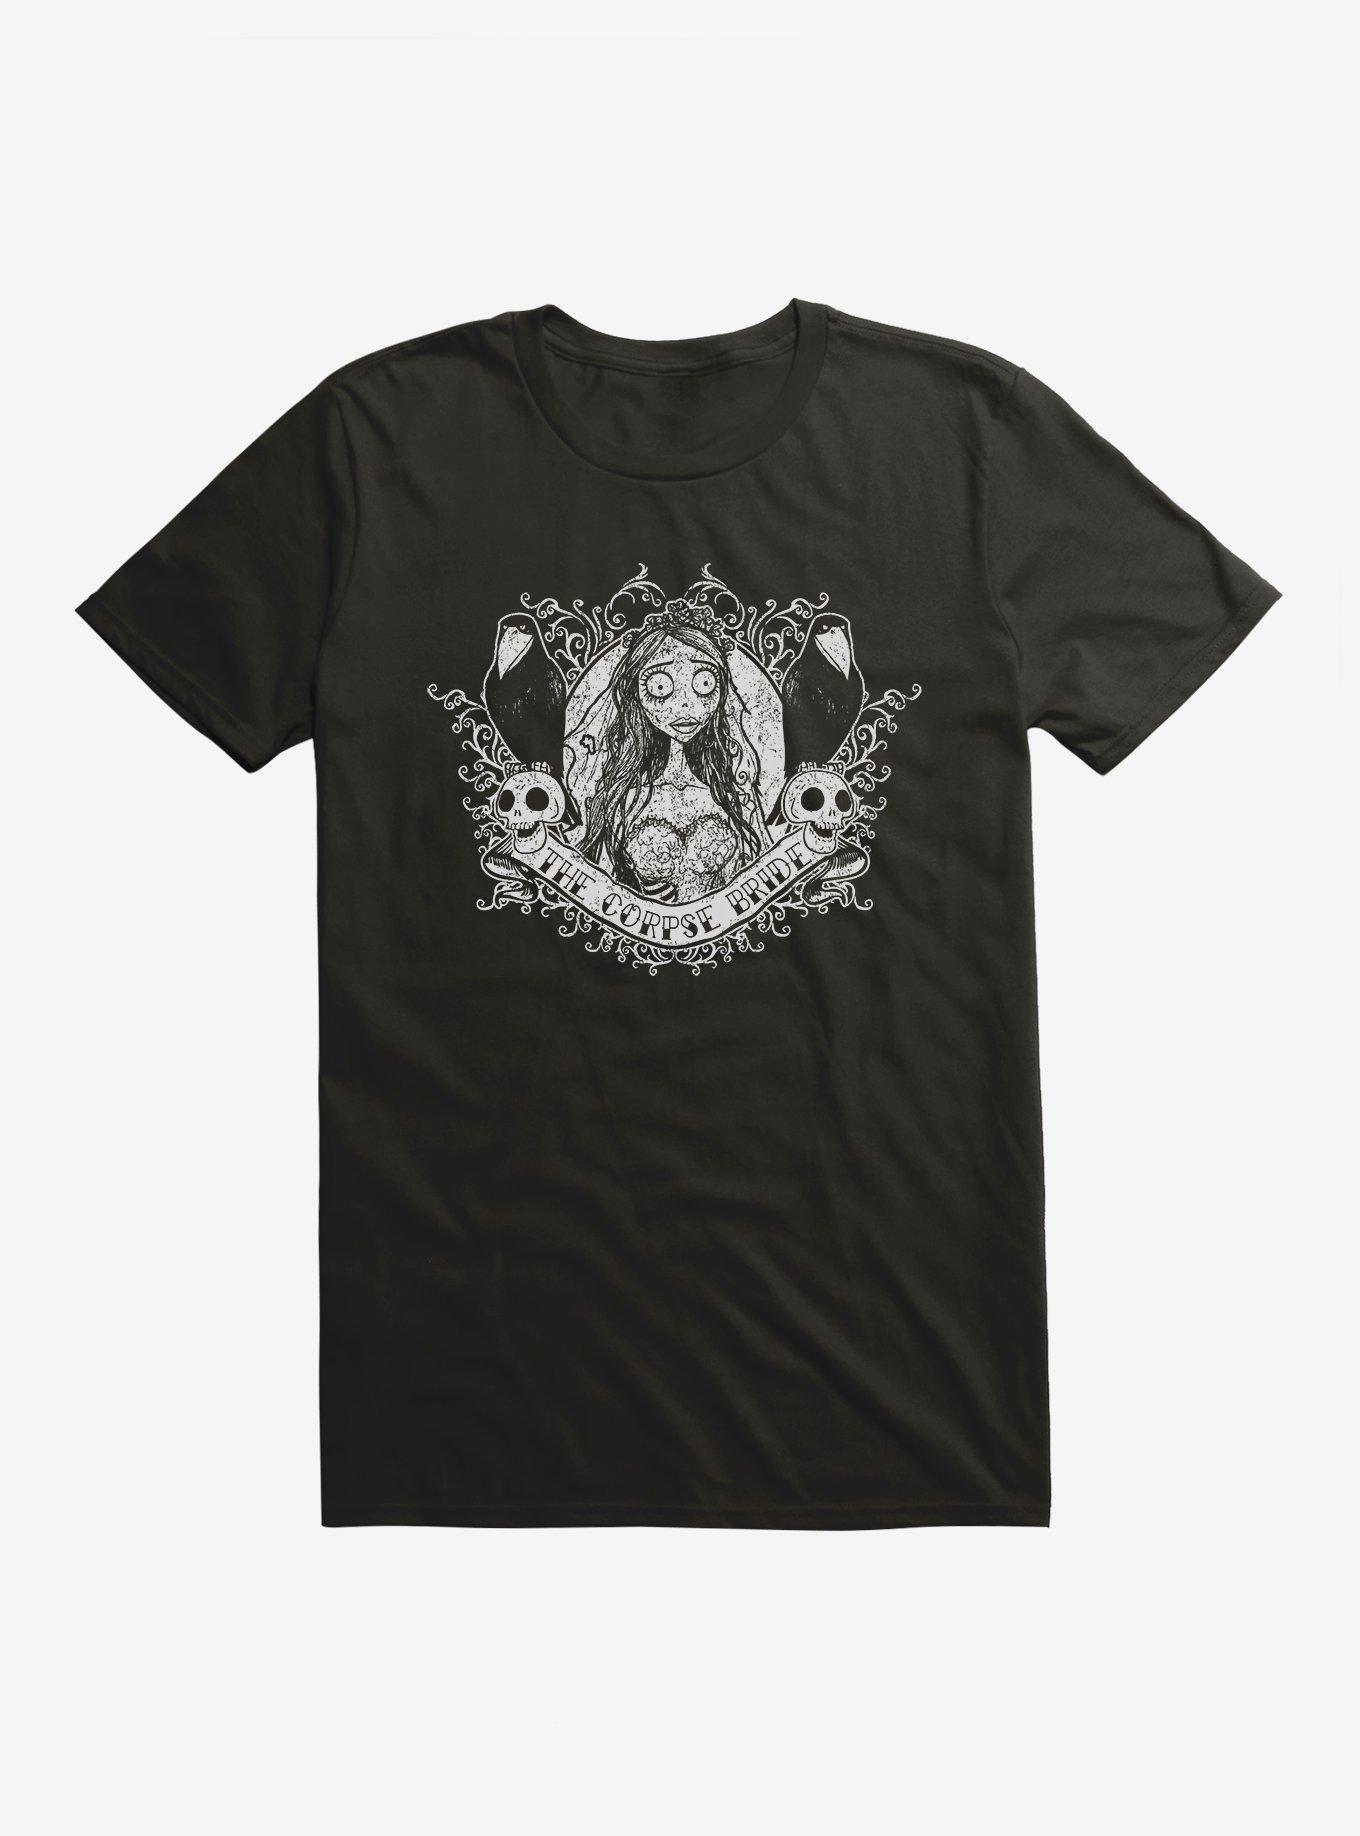 Corpse Bride Emily The Corpse Bride T-Shirt | BoxLunch